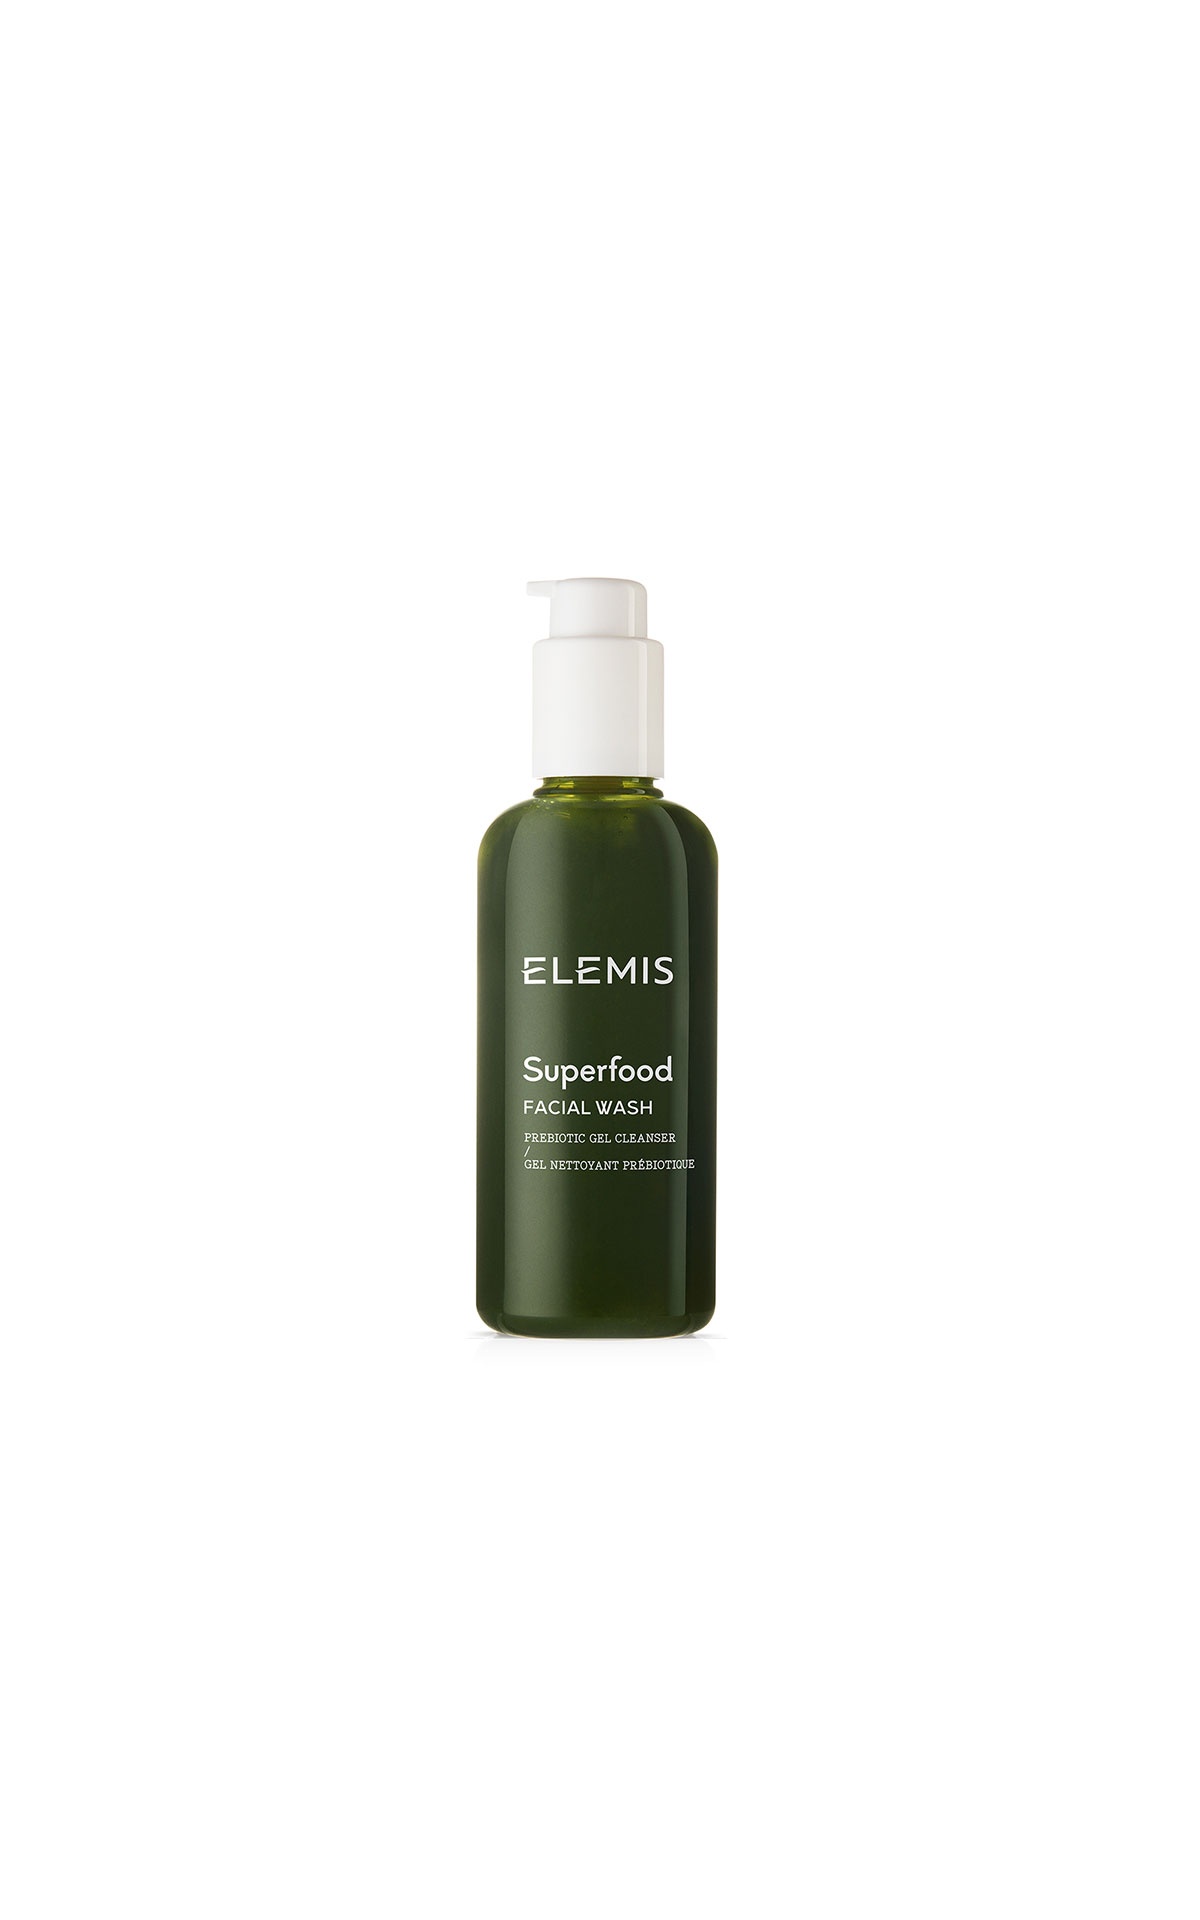 Elemis Superfood facial wash from Bicester Village